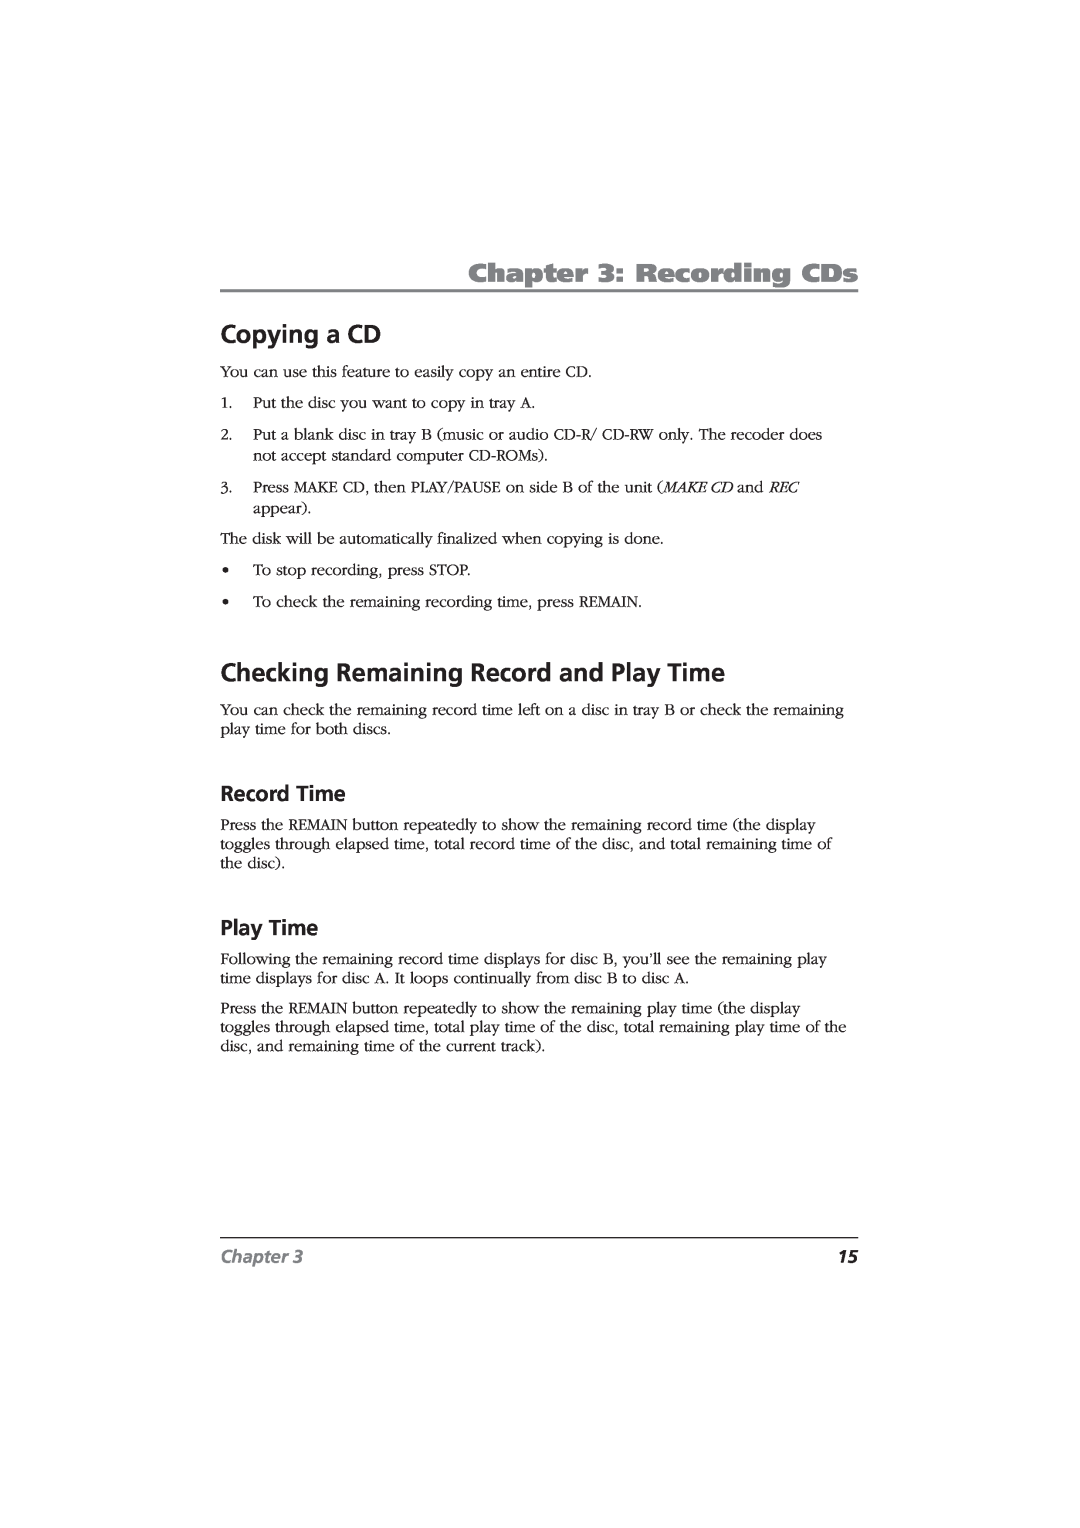 RCA CDRW10 manual Recording CDs, Copying a CD, Checking Remaining Record and Play Time, Chapter 